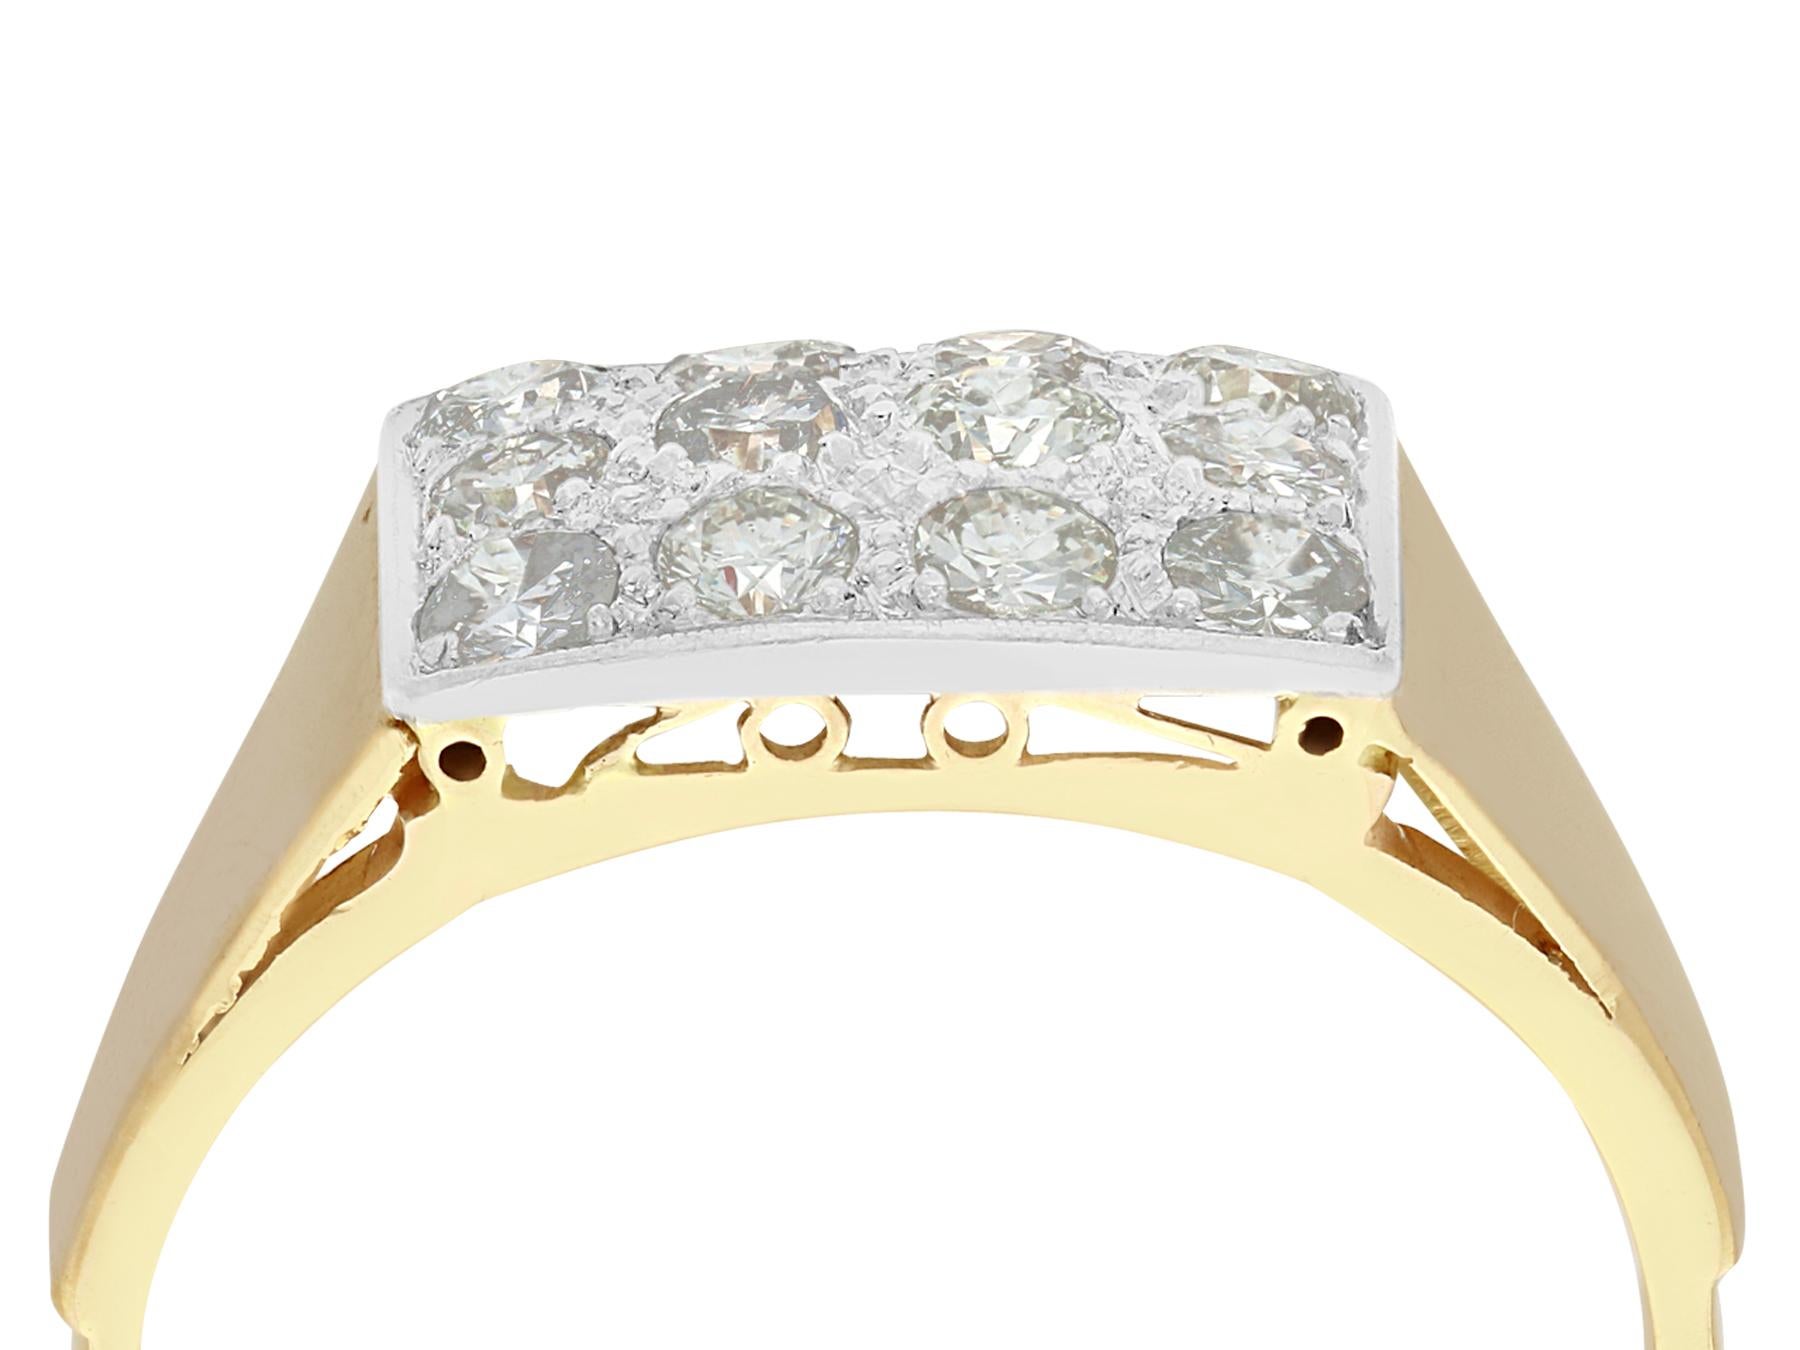 An impressive antique 1.28 carat diamond and 18 karat yellow gold, 18 karat white gold set gent's dress ring; part of our diverse gent's antique jewelry collections.

This fine and impressive antique gent's diamond ring has been crafted in 18k